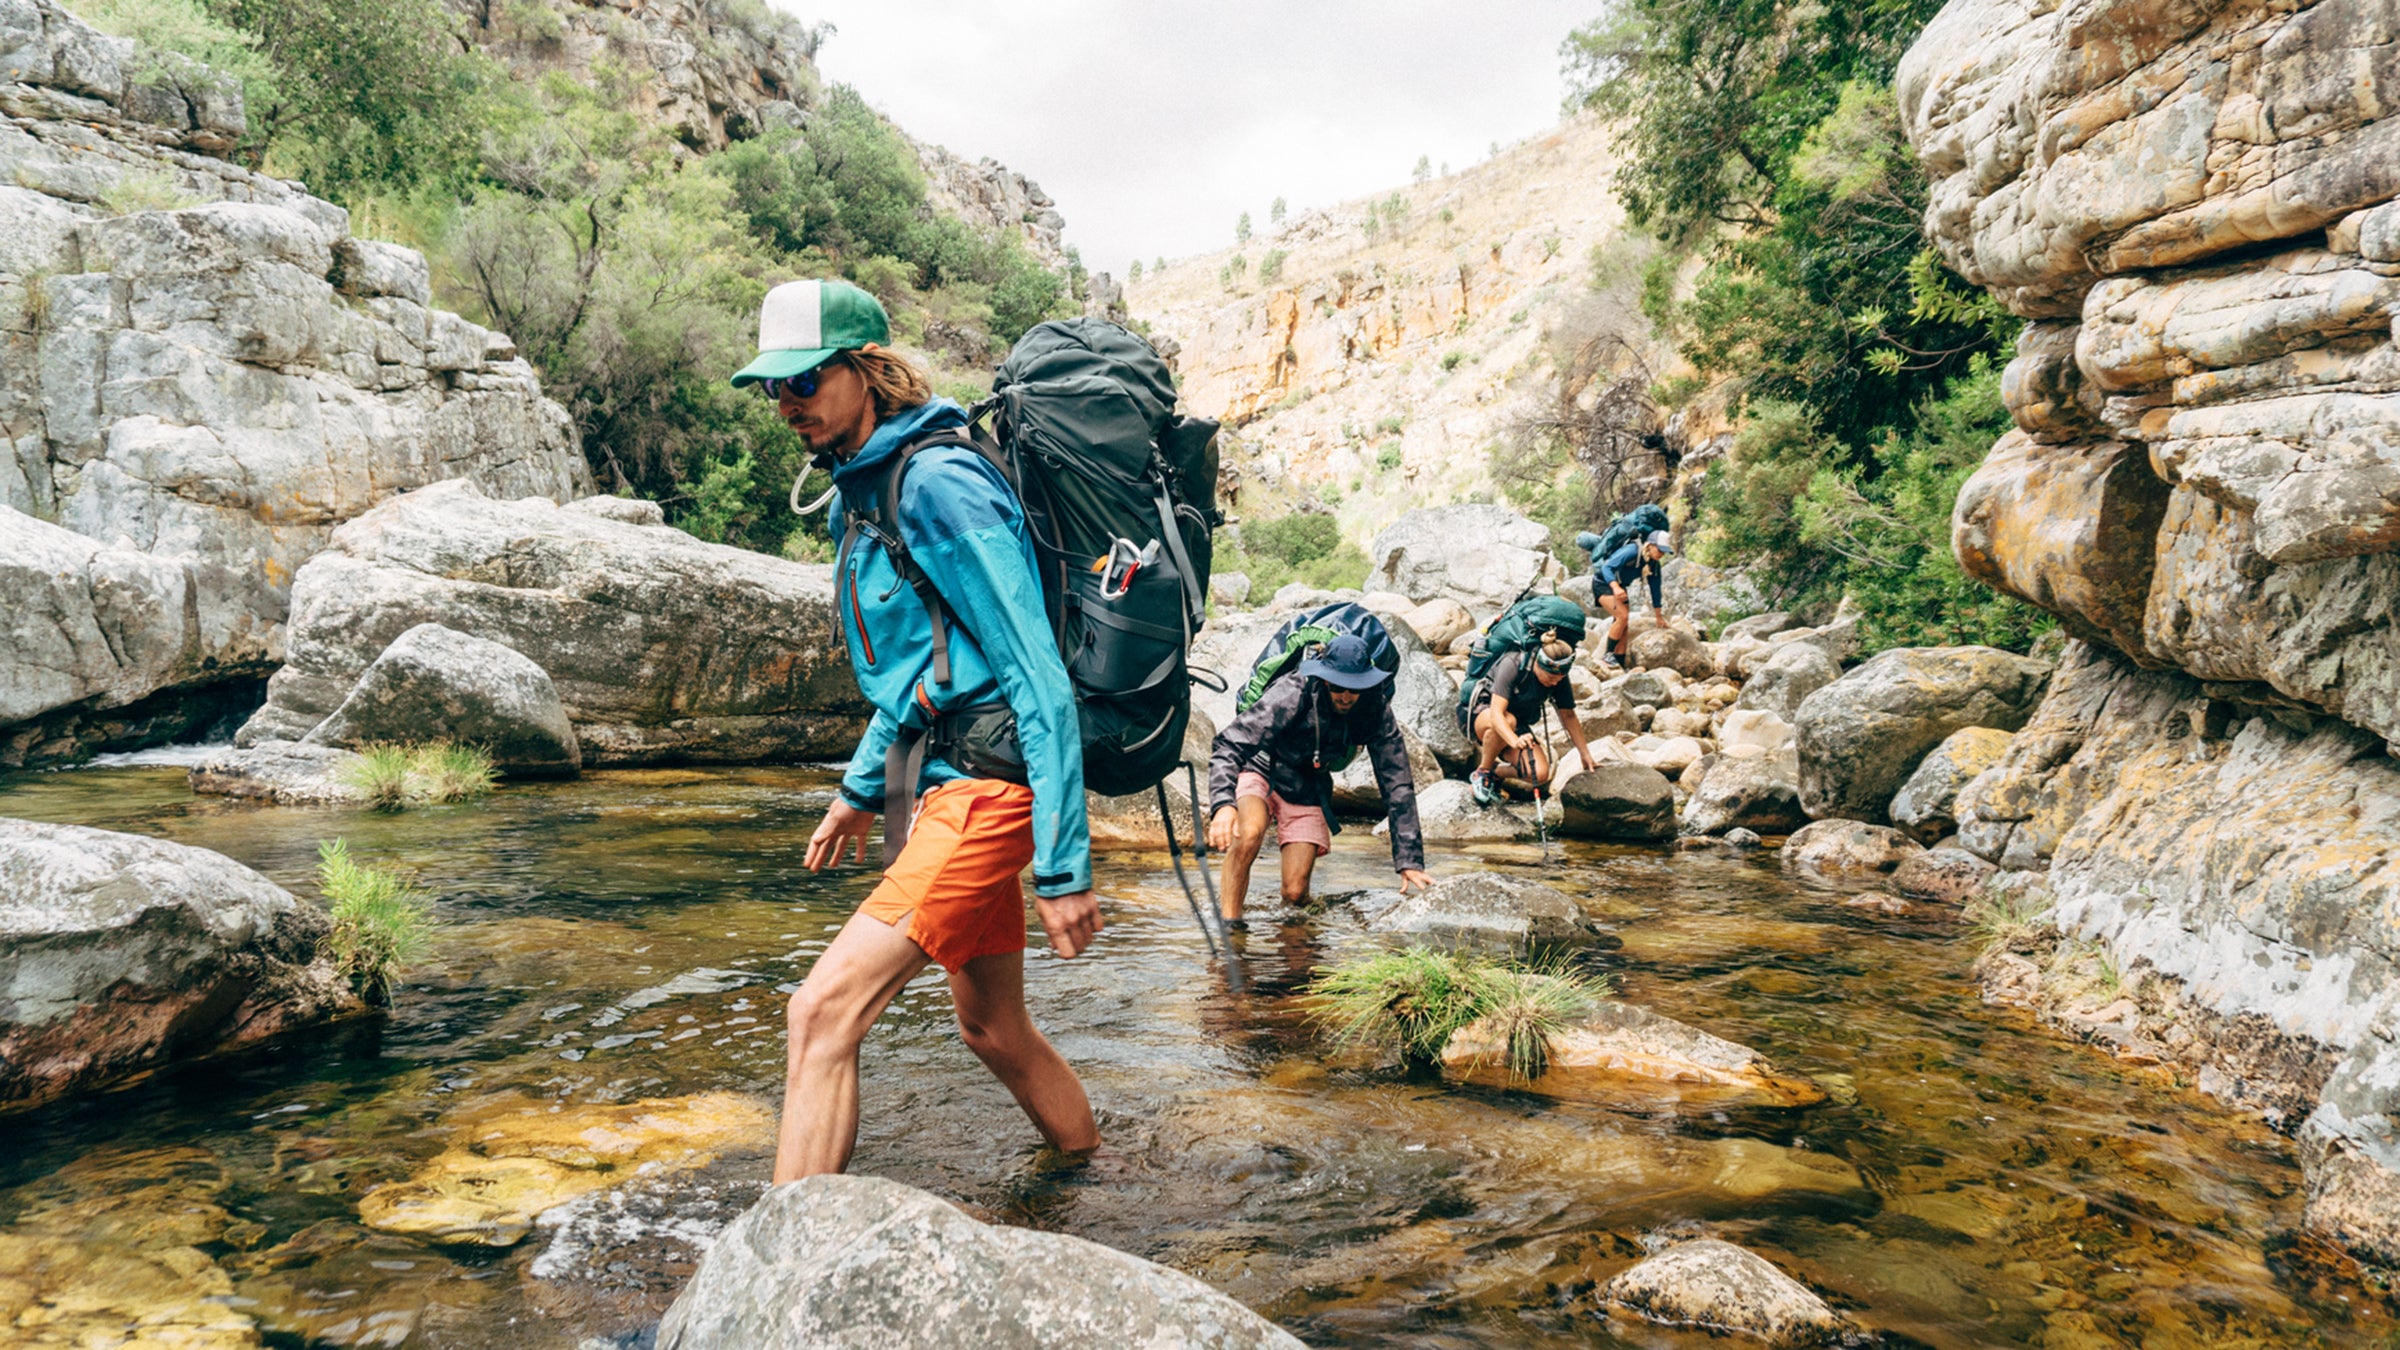 Tech on the Trail: Silicon Valley's Favorite Smart Hiking Gear